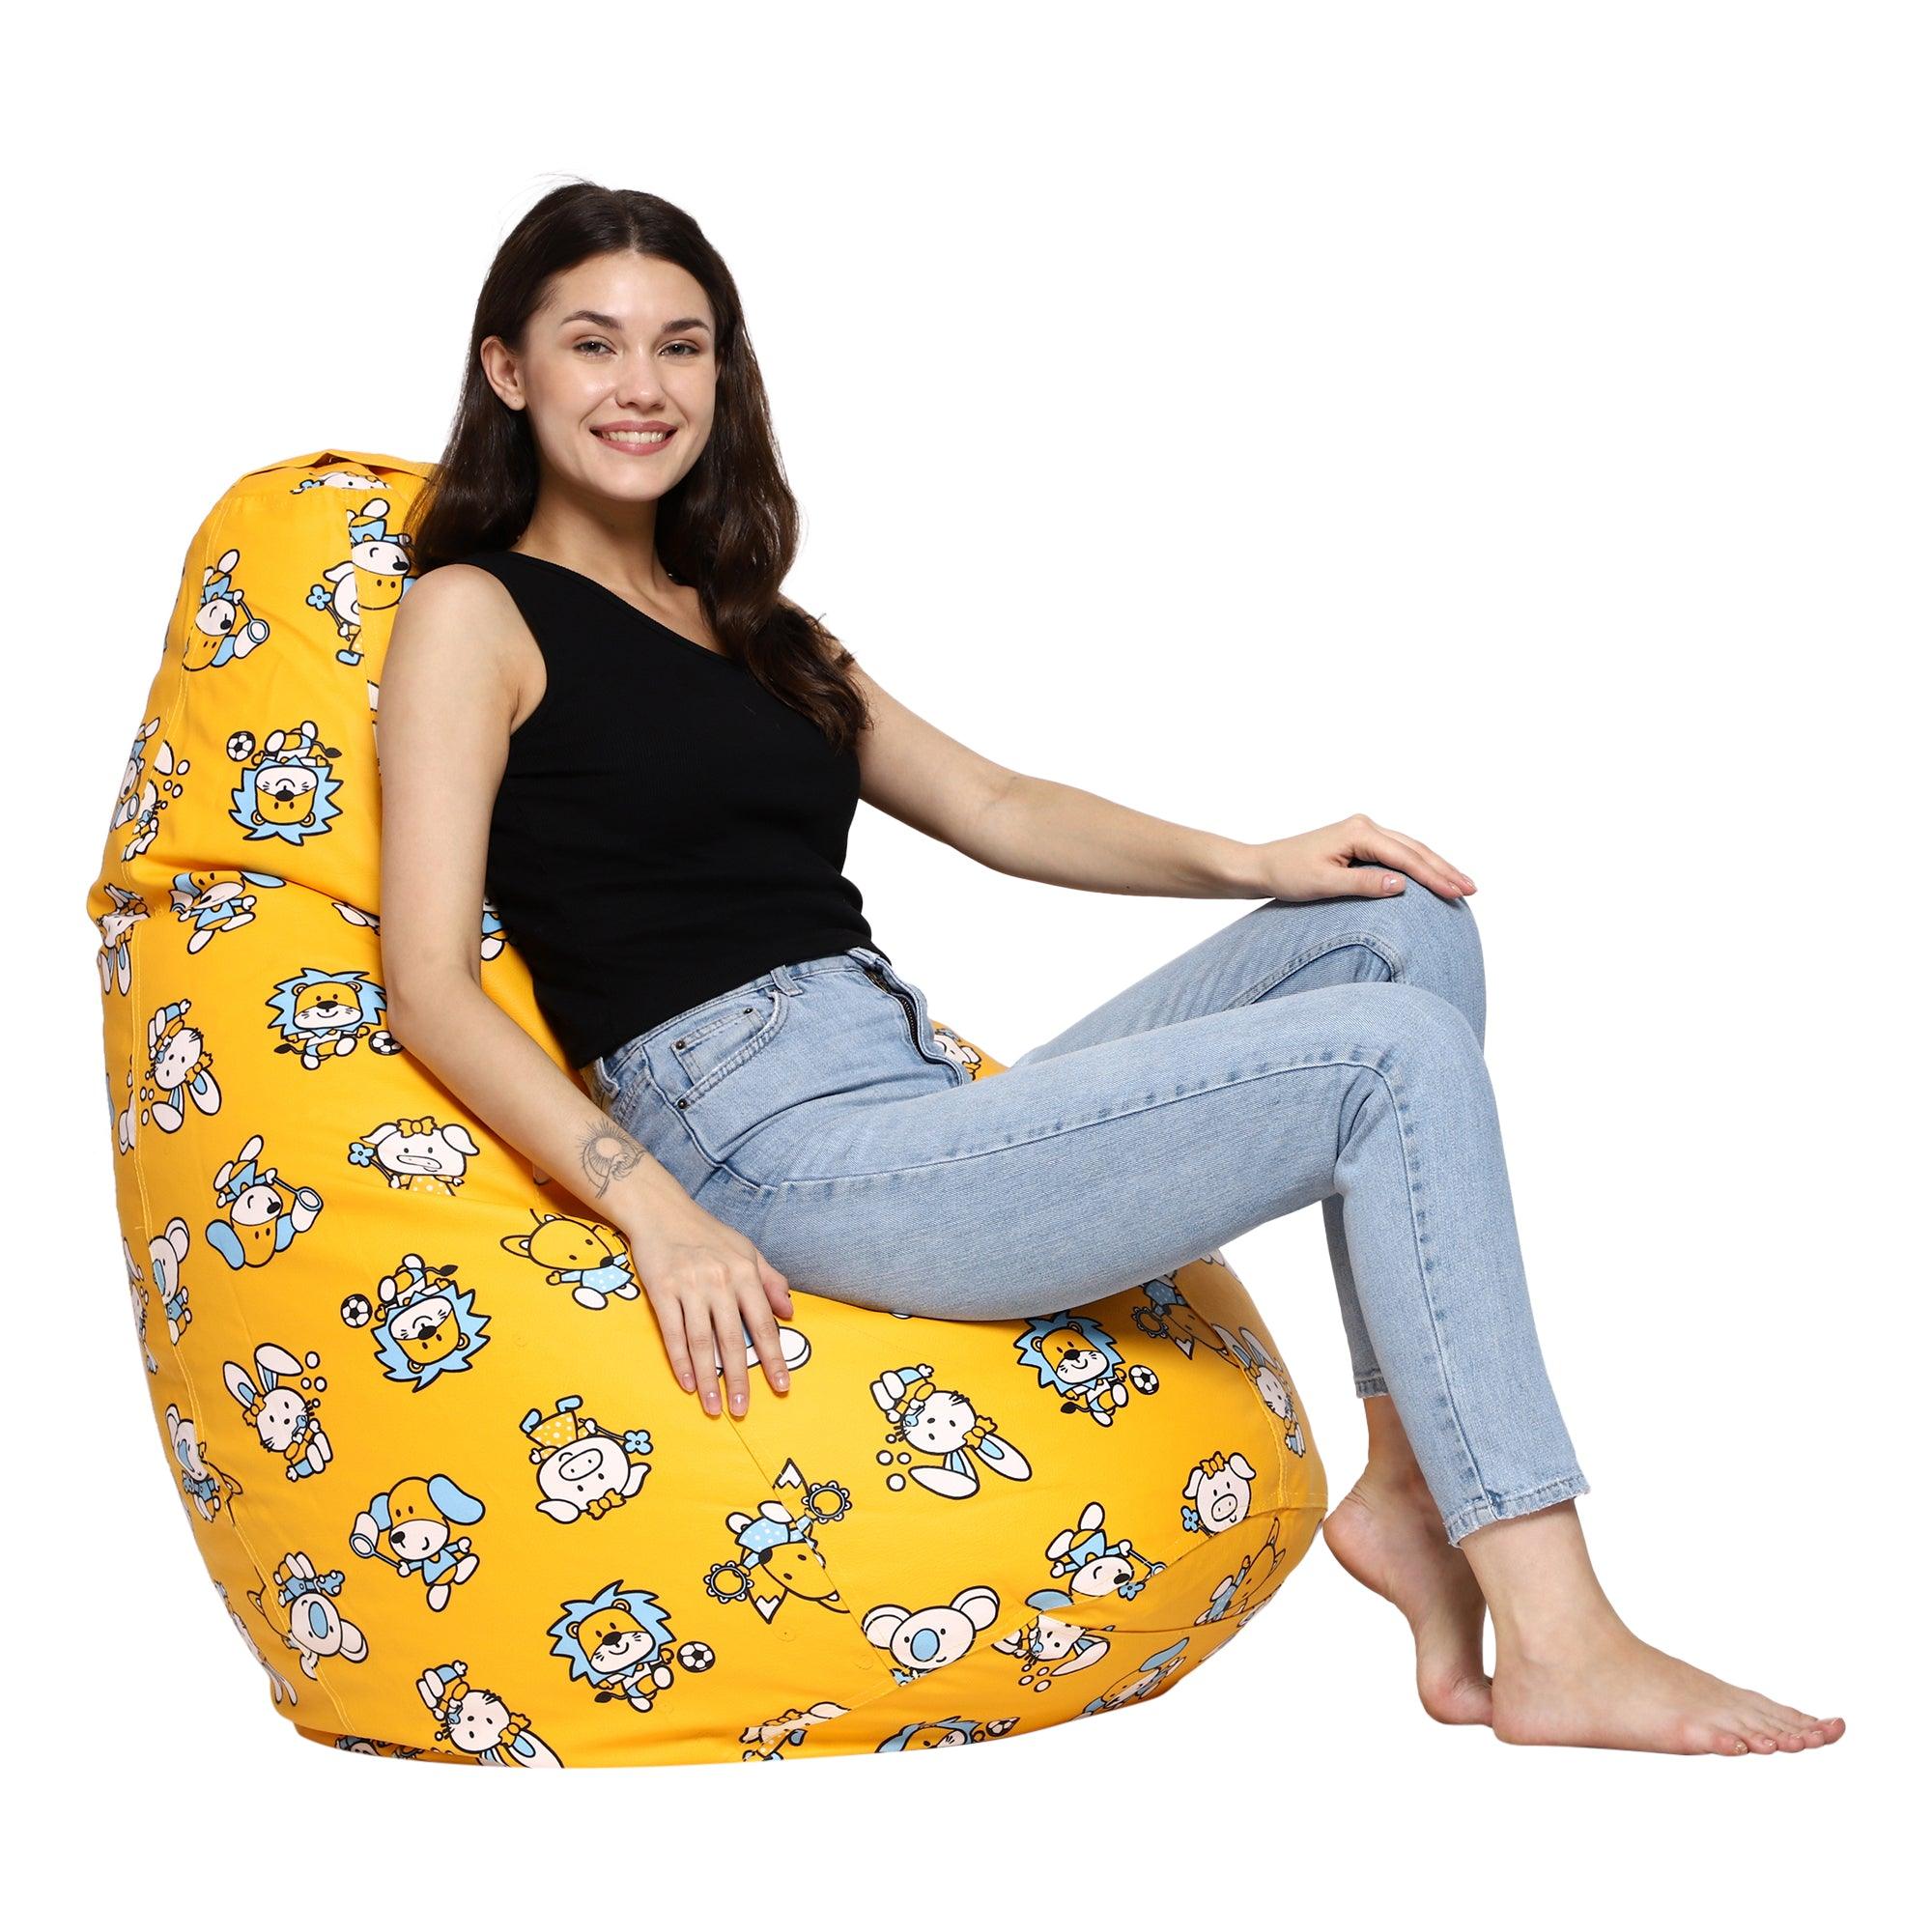 Sattva Triangle Shaped Cotton Canvas Printed Bean Bag Cover (Without Beans)  - Black Polka in Bangalore at best price by Excel Ventures - Justdial